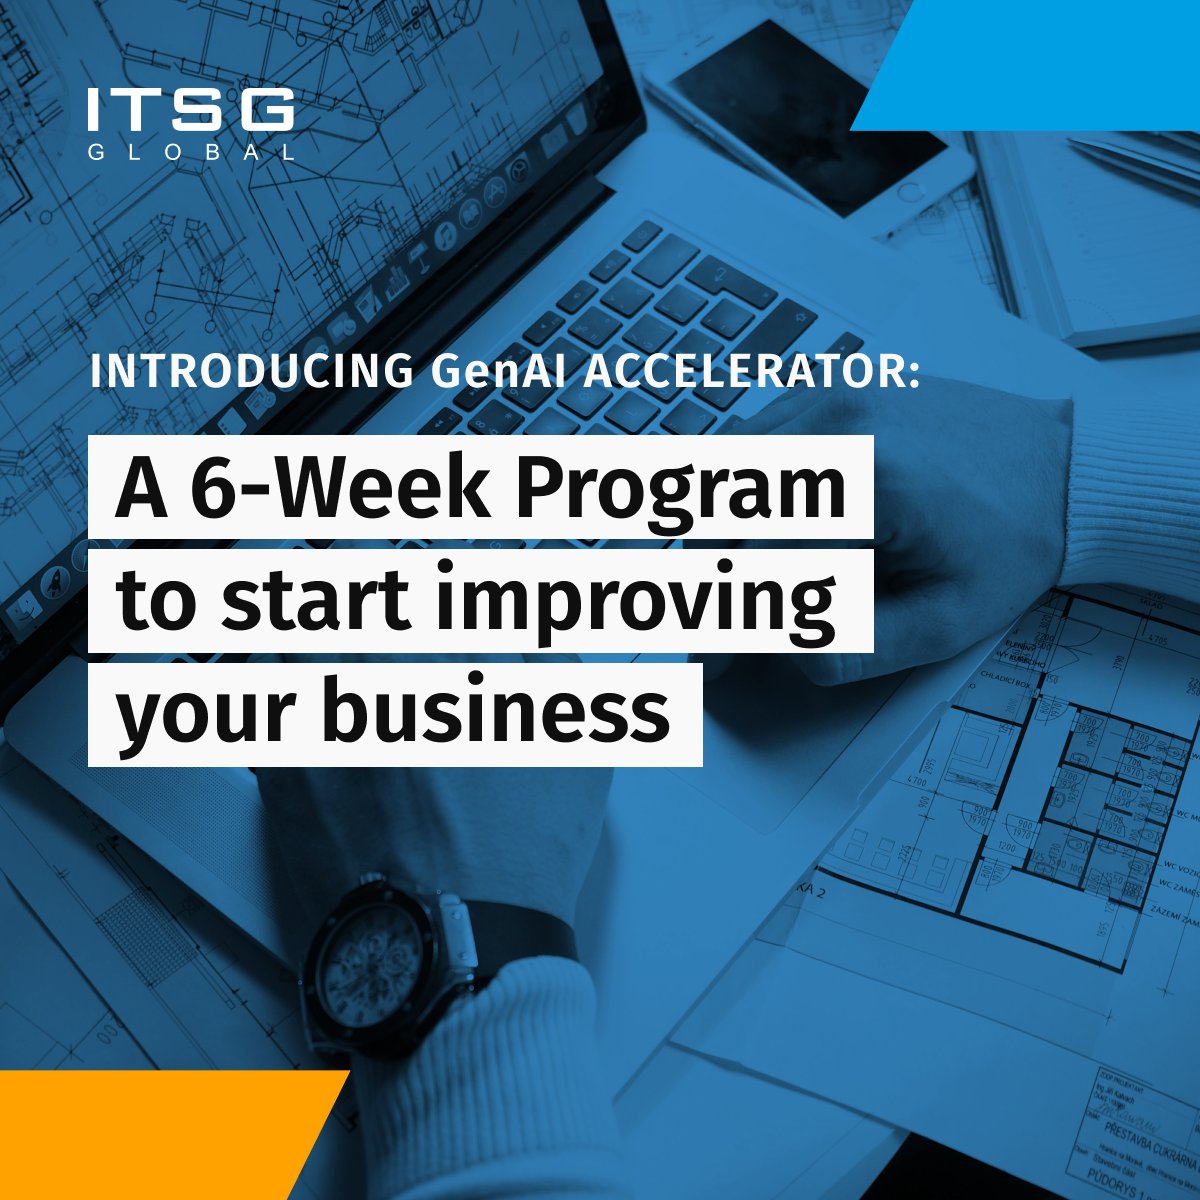 Something perfect for companies aiming to get ahead without being GenAI experts yet. 😊 Find out more: itsg-global.com/solutions/mode… 👈 #ITSG #GenAI #AIInnovation #GenAIAccelerator #BusinessTransformation #AIProgram #DigitalTransformation #BusinessInnovation